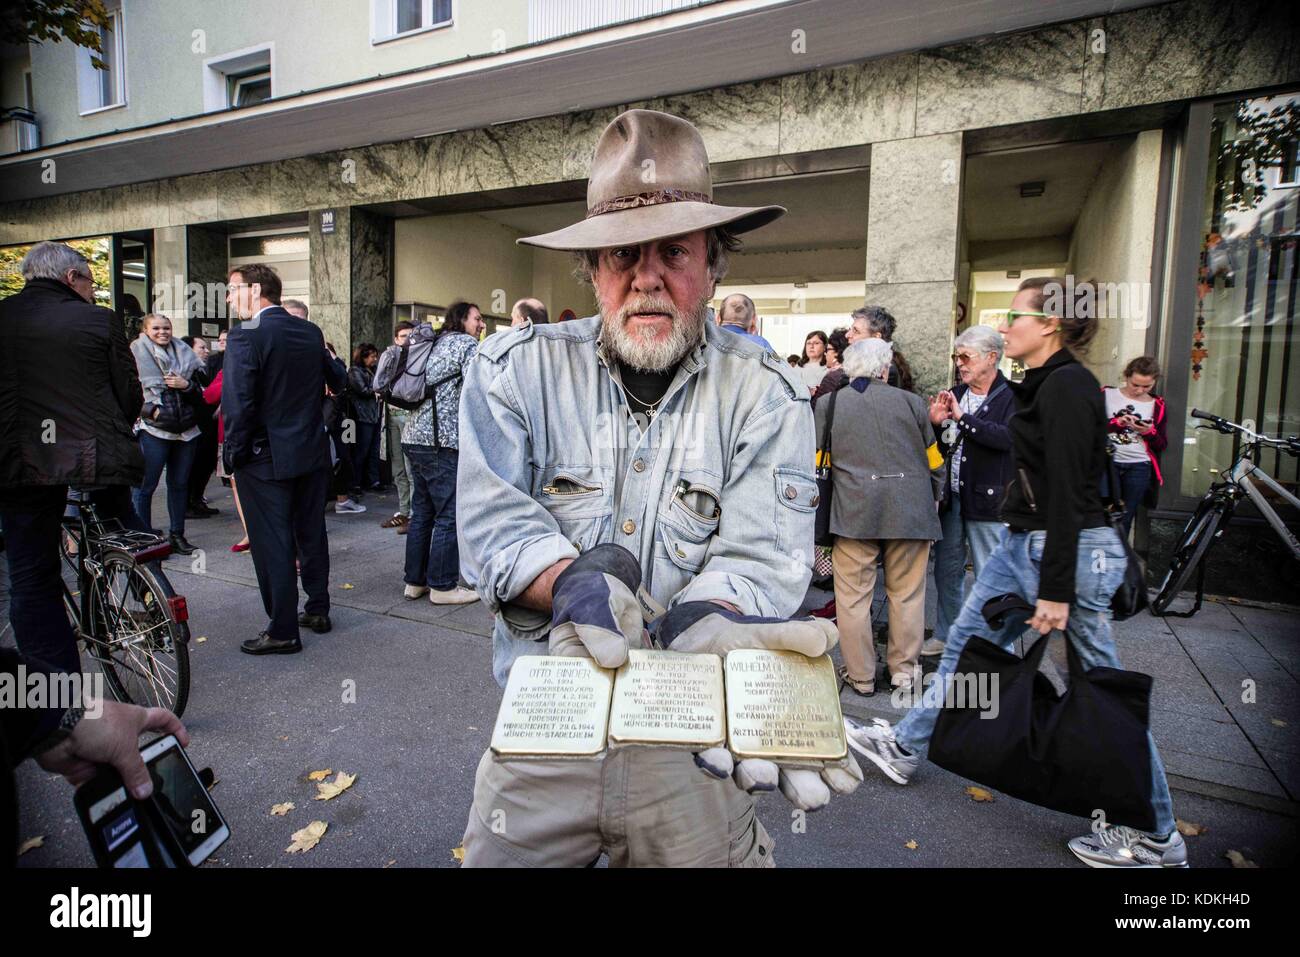 Munich, Bavaria, Germany. 14th Oct, 2017. Artist Gunter Demnig. Despite lengthy battles, the so-called Stolpersteine (Ã¢â‚¬Å“Stumbling BlocksÃ¢â‚¬Â) containing the names & information of victims of National Socialism were installed at four different sites in Munich. The City of Munich forbid the installation of the memorial stones on public ground in 2015, which led the Stolpersteine Initiative (Ã¢â‚¬ËœStumbling Block InitiativeÃ¢â‚¬Â) to seek private properties to install them. To date, 61,000 Stolpersteine in 2,000 cities in 21 countries have been dedicated, with much criticism lobbe Stock Photo